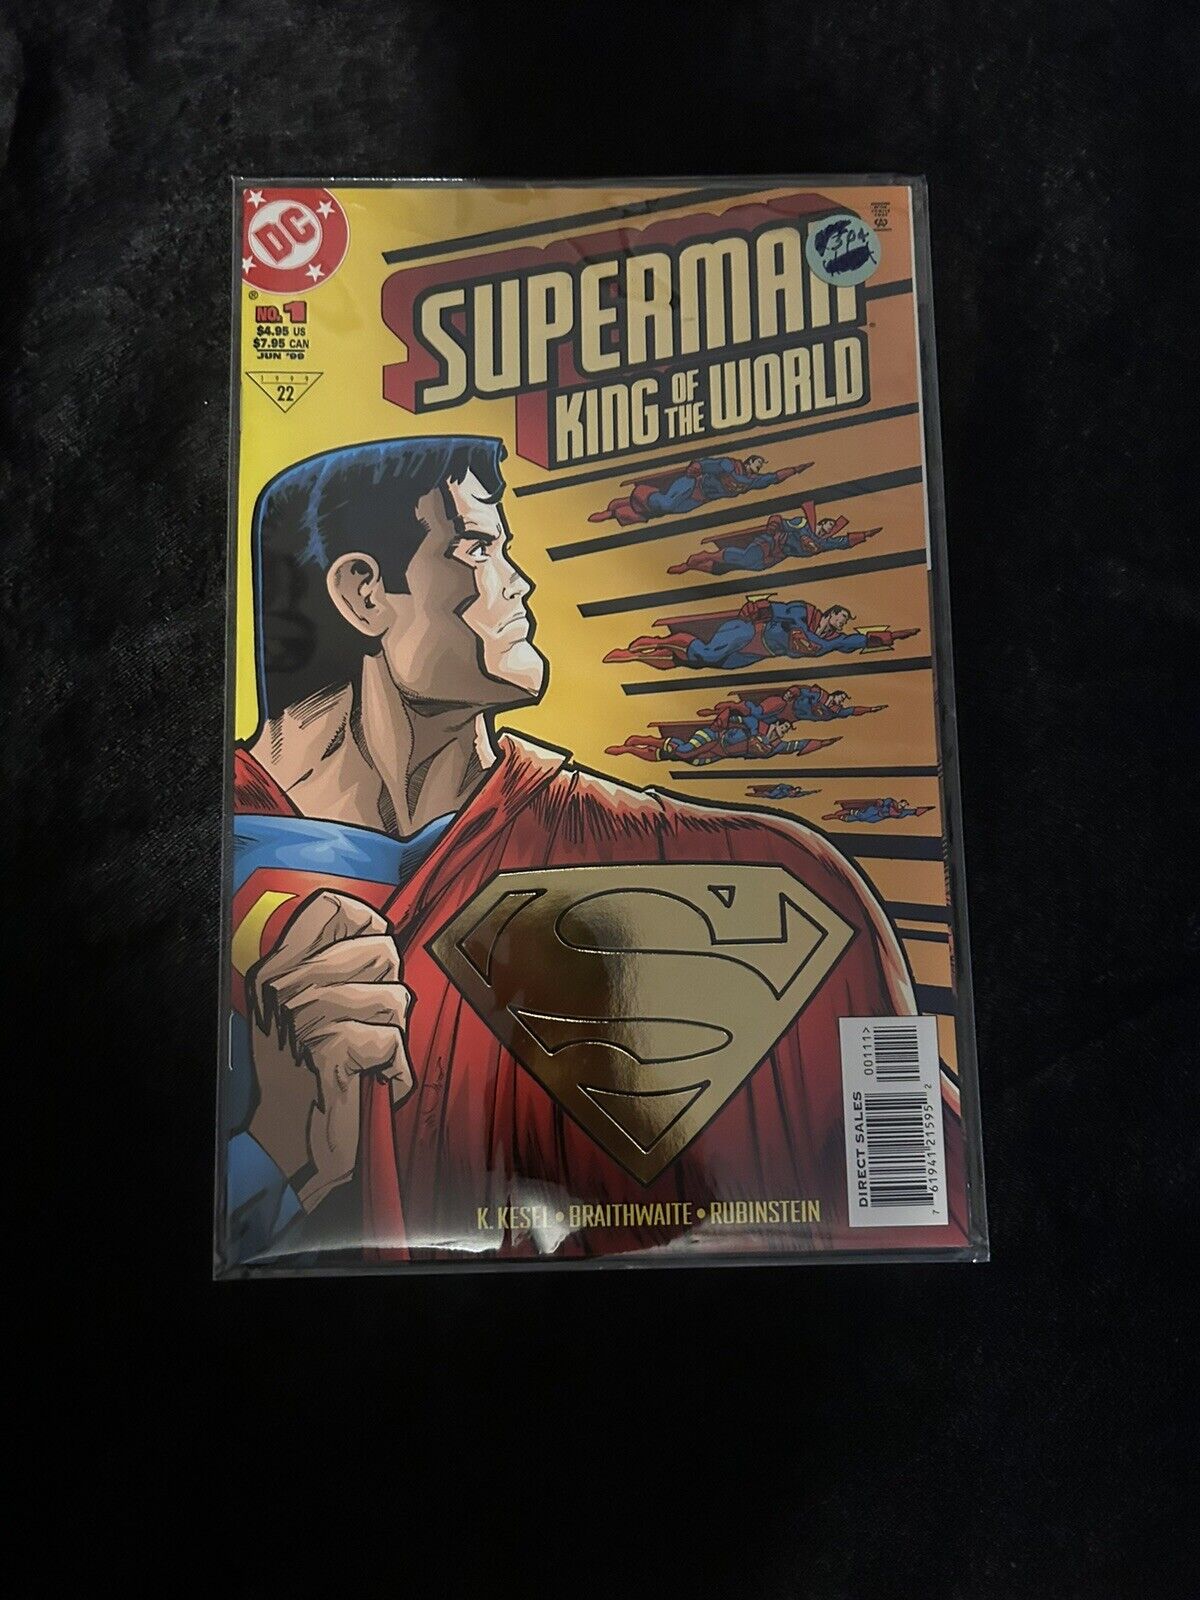 DC 2000 SUPERMAN KING OF THE WORLD Comic Book Issue # 1 ONE SHOT GOLD FOIL